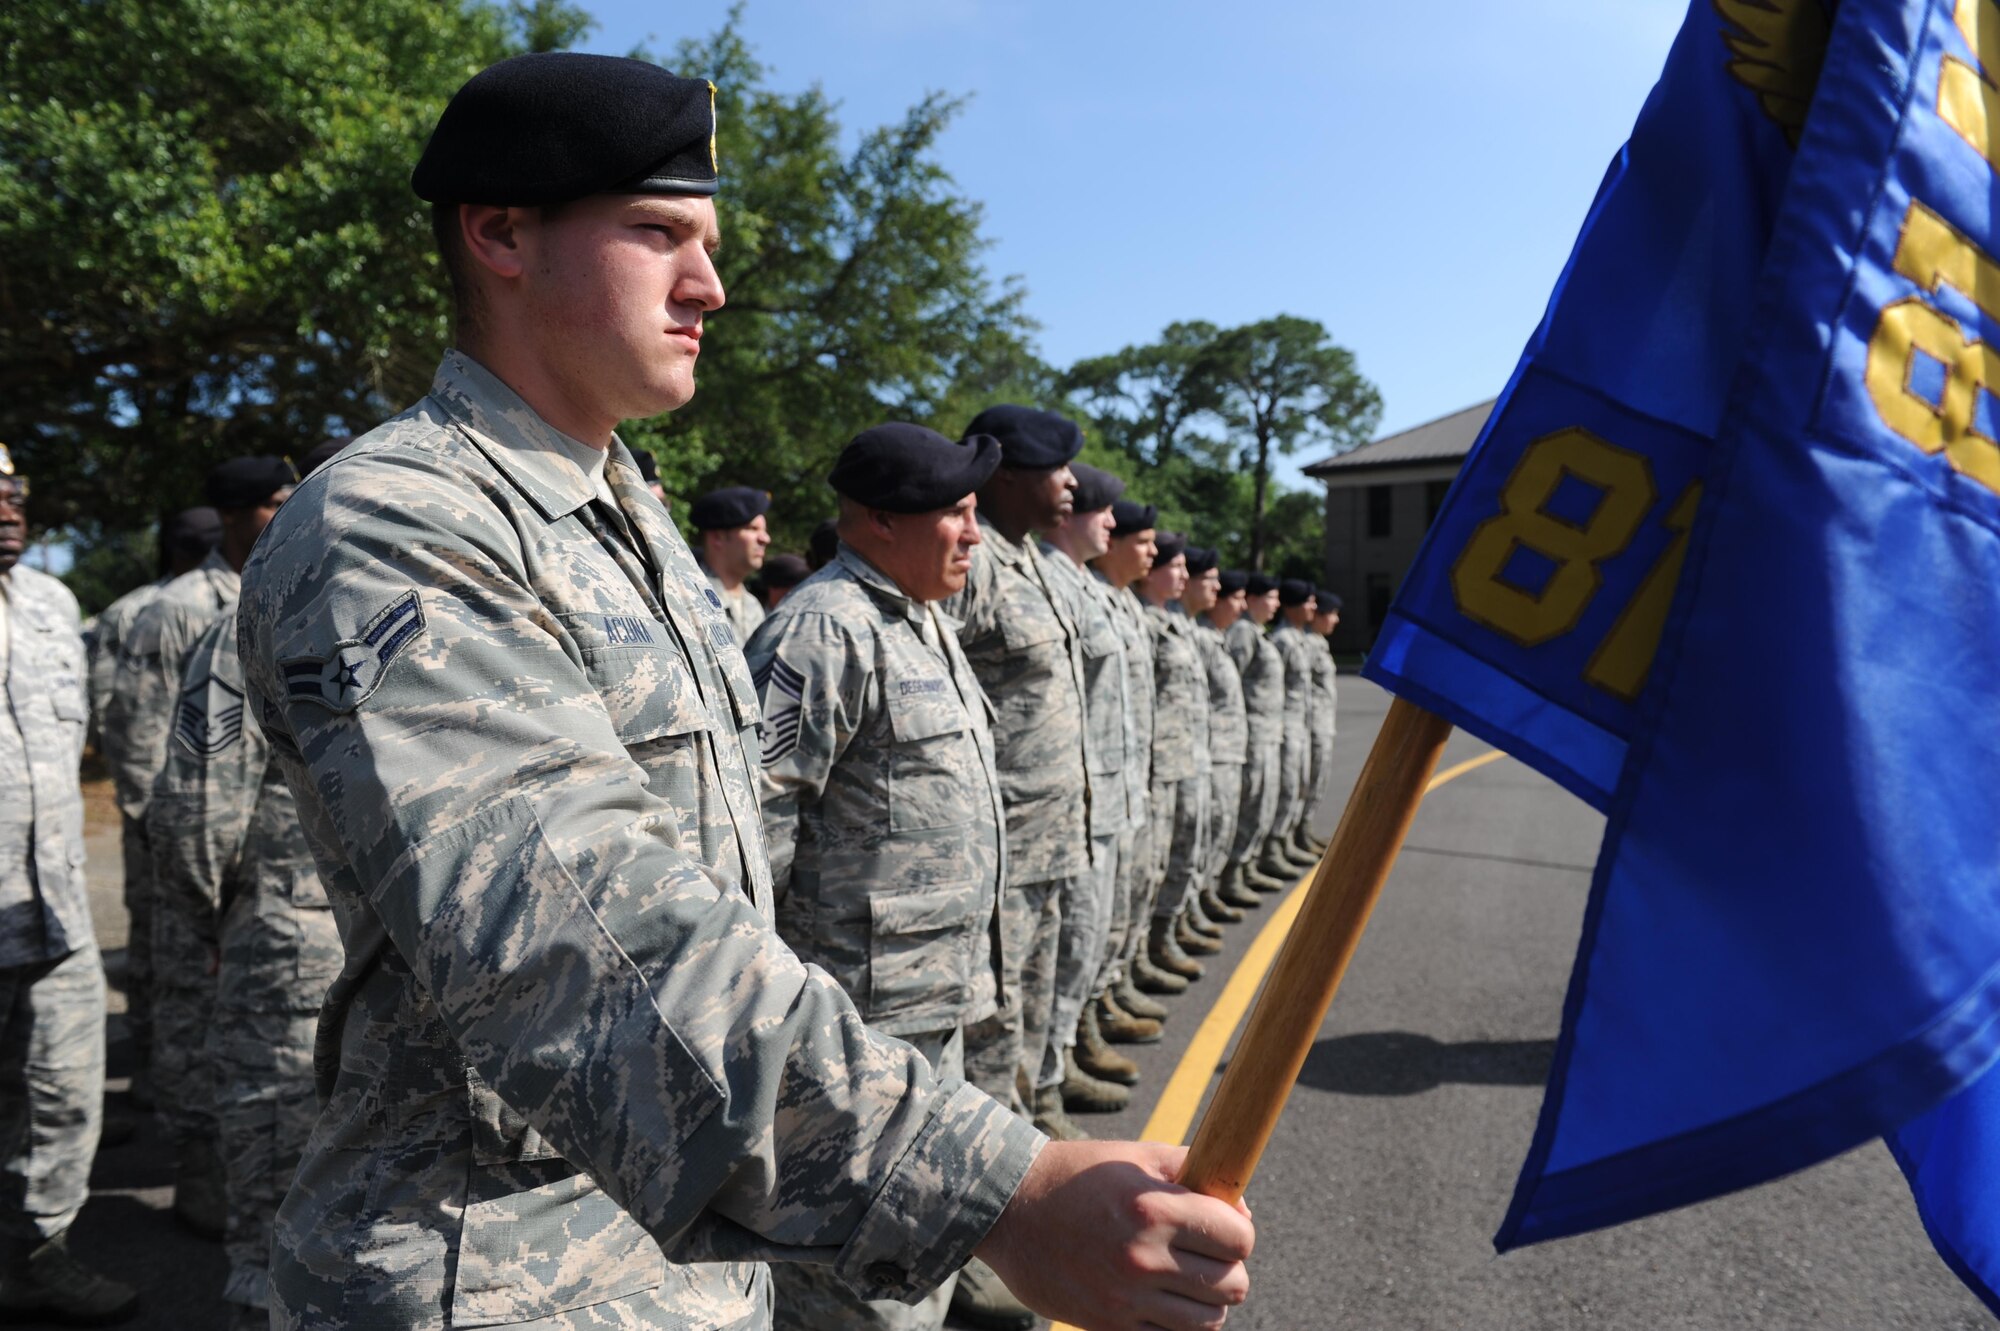 Airman 1st Class Matias Acuna, 81st Security Forces Squadron entry controller, holds the squadron guidon during the 81st SFS Retreat Ceremony May 19, 2016, Keesler Air Force Base, Miss. The ceremony was held during National Police Week, which recognizes the service of law enforcement men and women who put their lives at risk every day. (U.S. Air Force photo by Kemberly Groue)